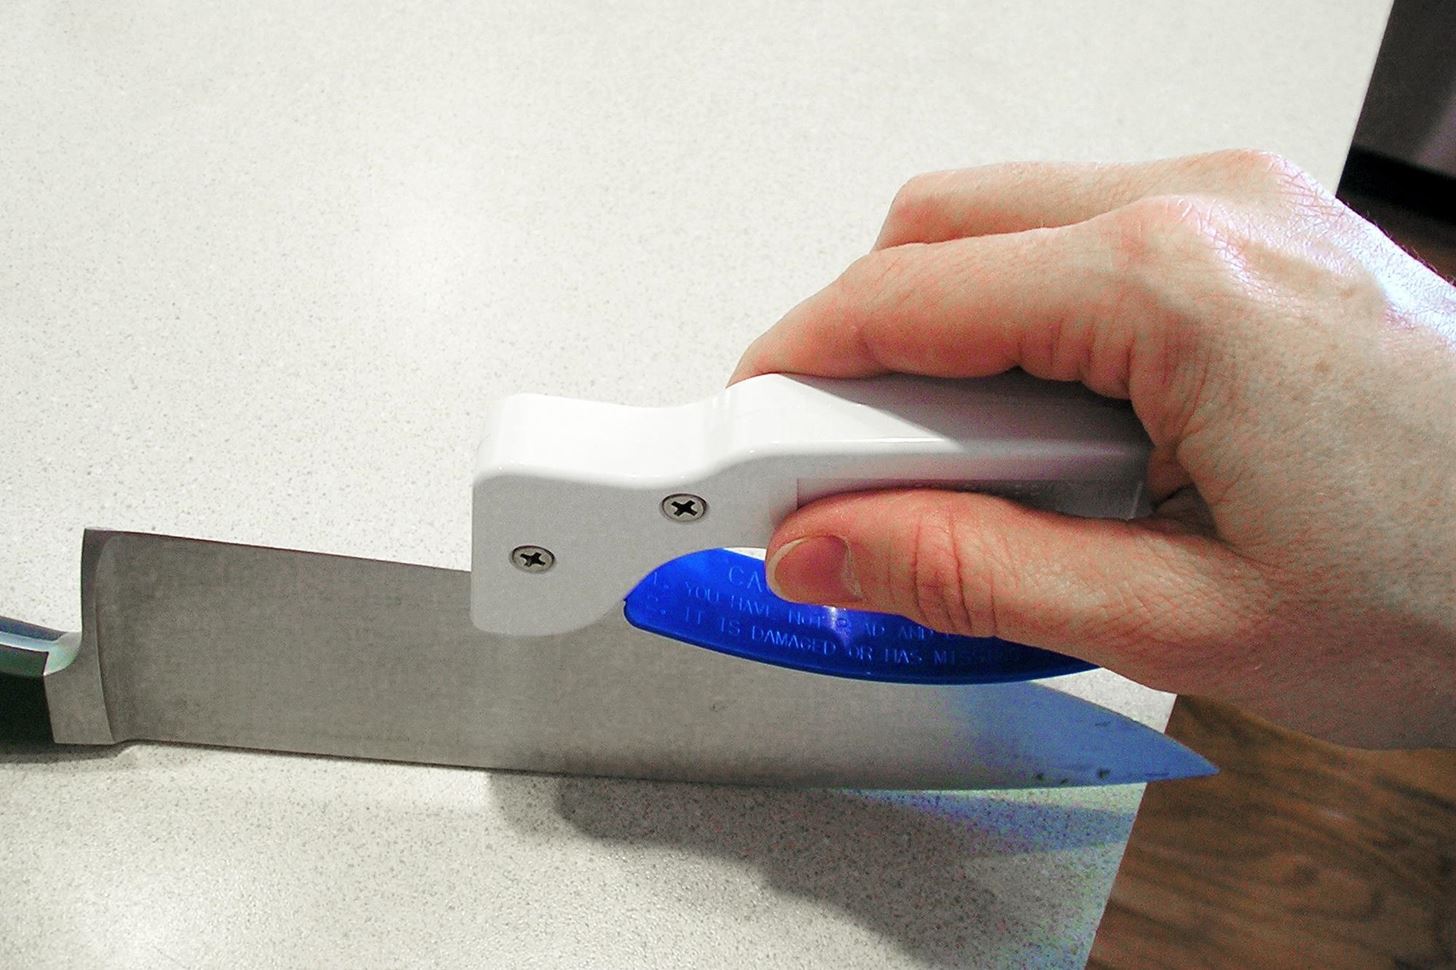 Food Tool Friday: This $9 Idiot-Proof Knife Sharpener Gets Amazing Results